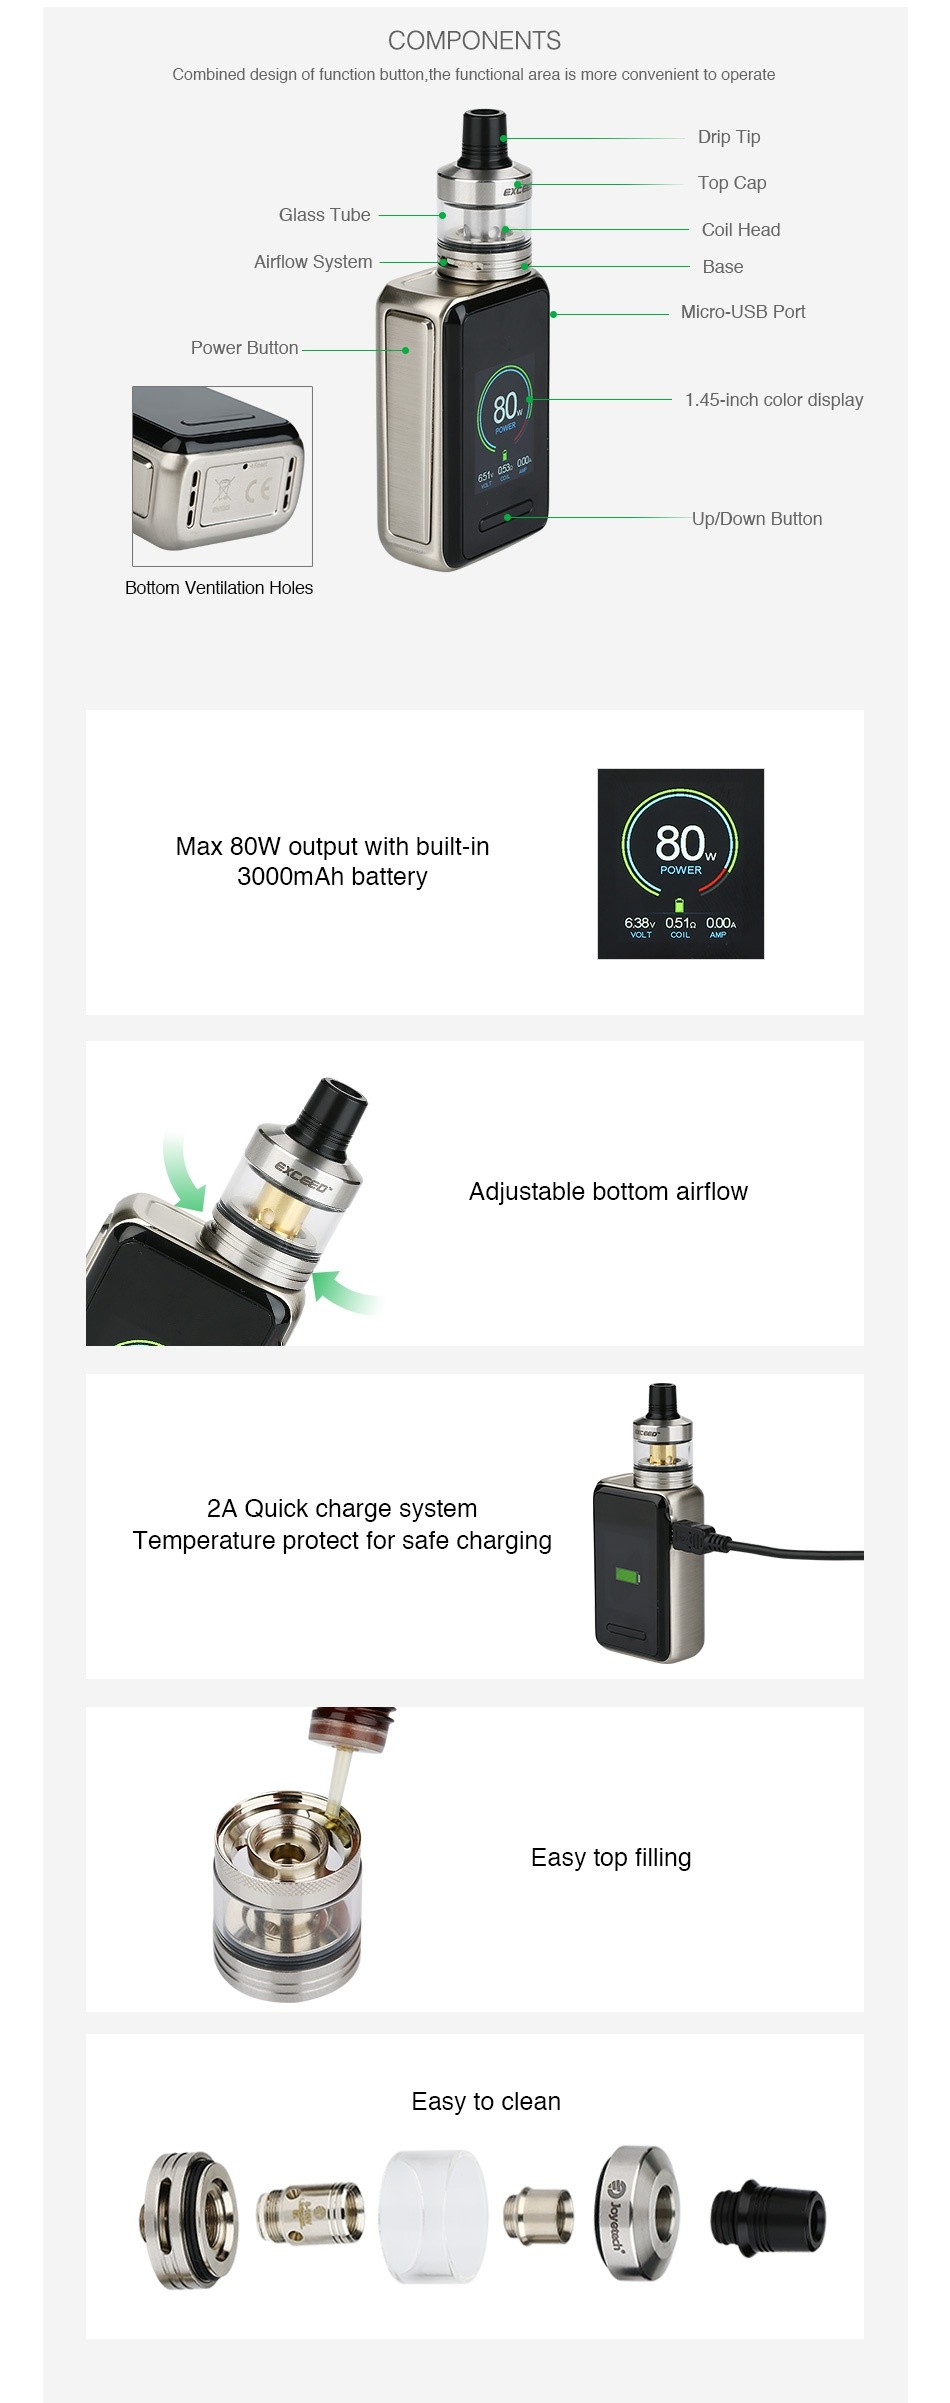 Joyetech CUBOID Lite 80W with Exceed D22 TC Kit 3000mAh COMPONENTS Combined design of function button  the functional area is more convenient to operate Glass tube Coil Head   rlow system ase Micro USB Port Power Button 80 Botom ventilation holds Max 80W output with built in 80 3000mAh battery Adjustable bottom airflow 2A Quick charge system Temperature protect for safe charging Easy top filling Easy to clean  e